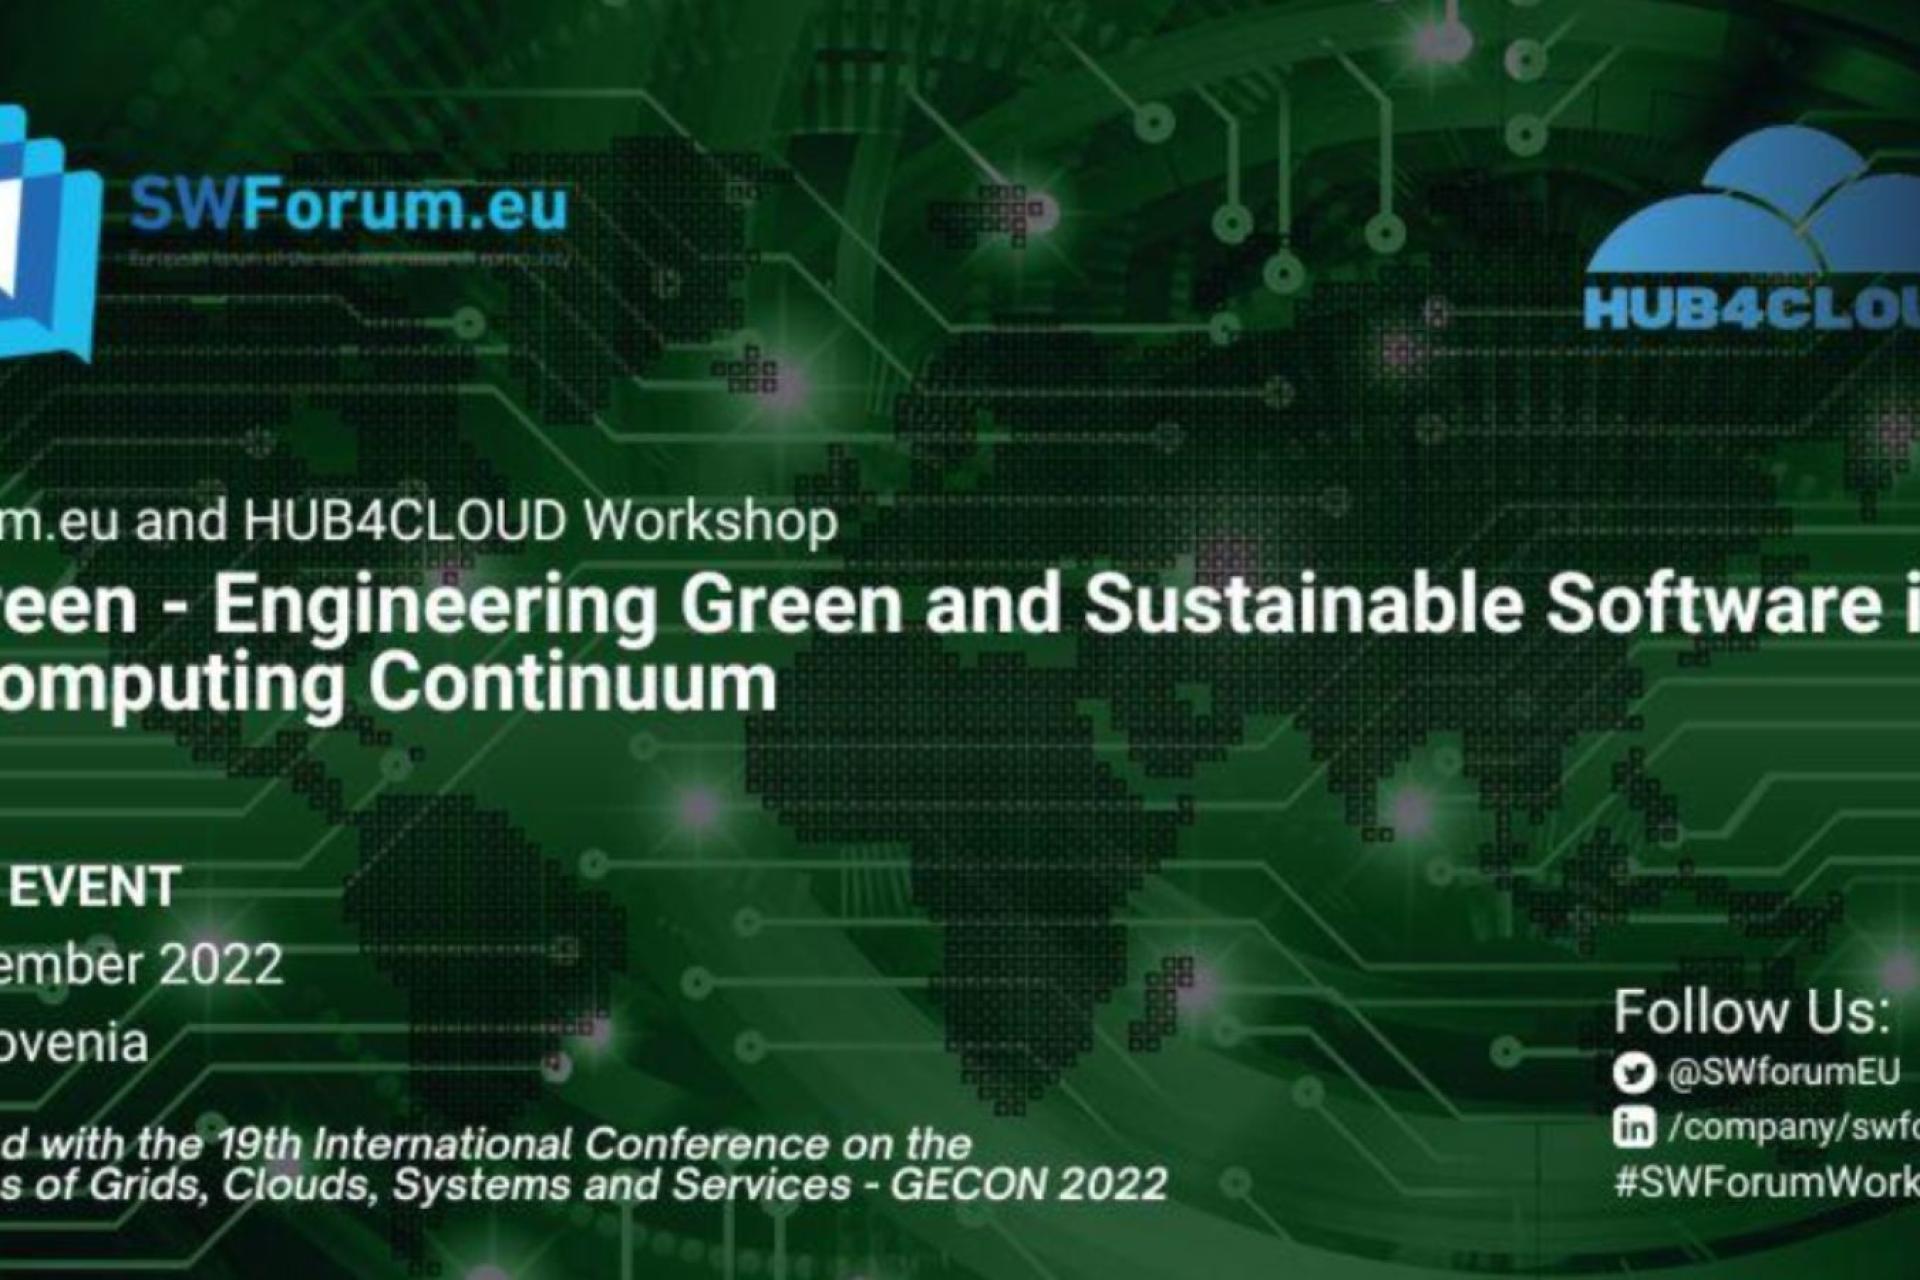 WEGreen - Engineering Green and Sustainable Software in the Computing Continuum